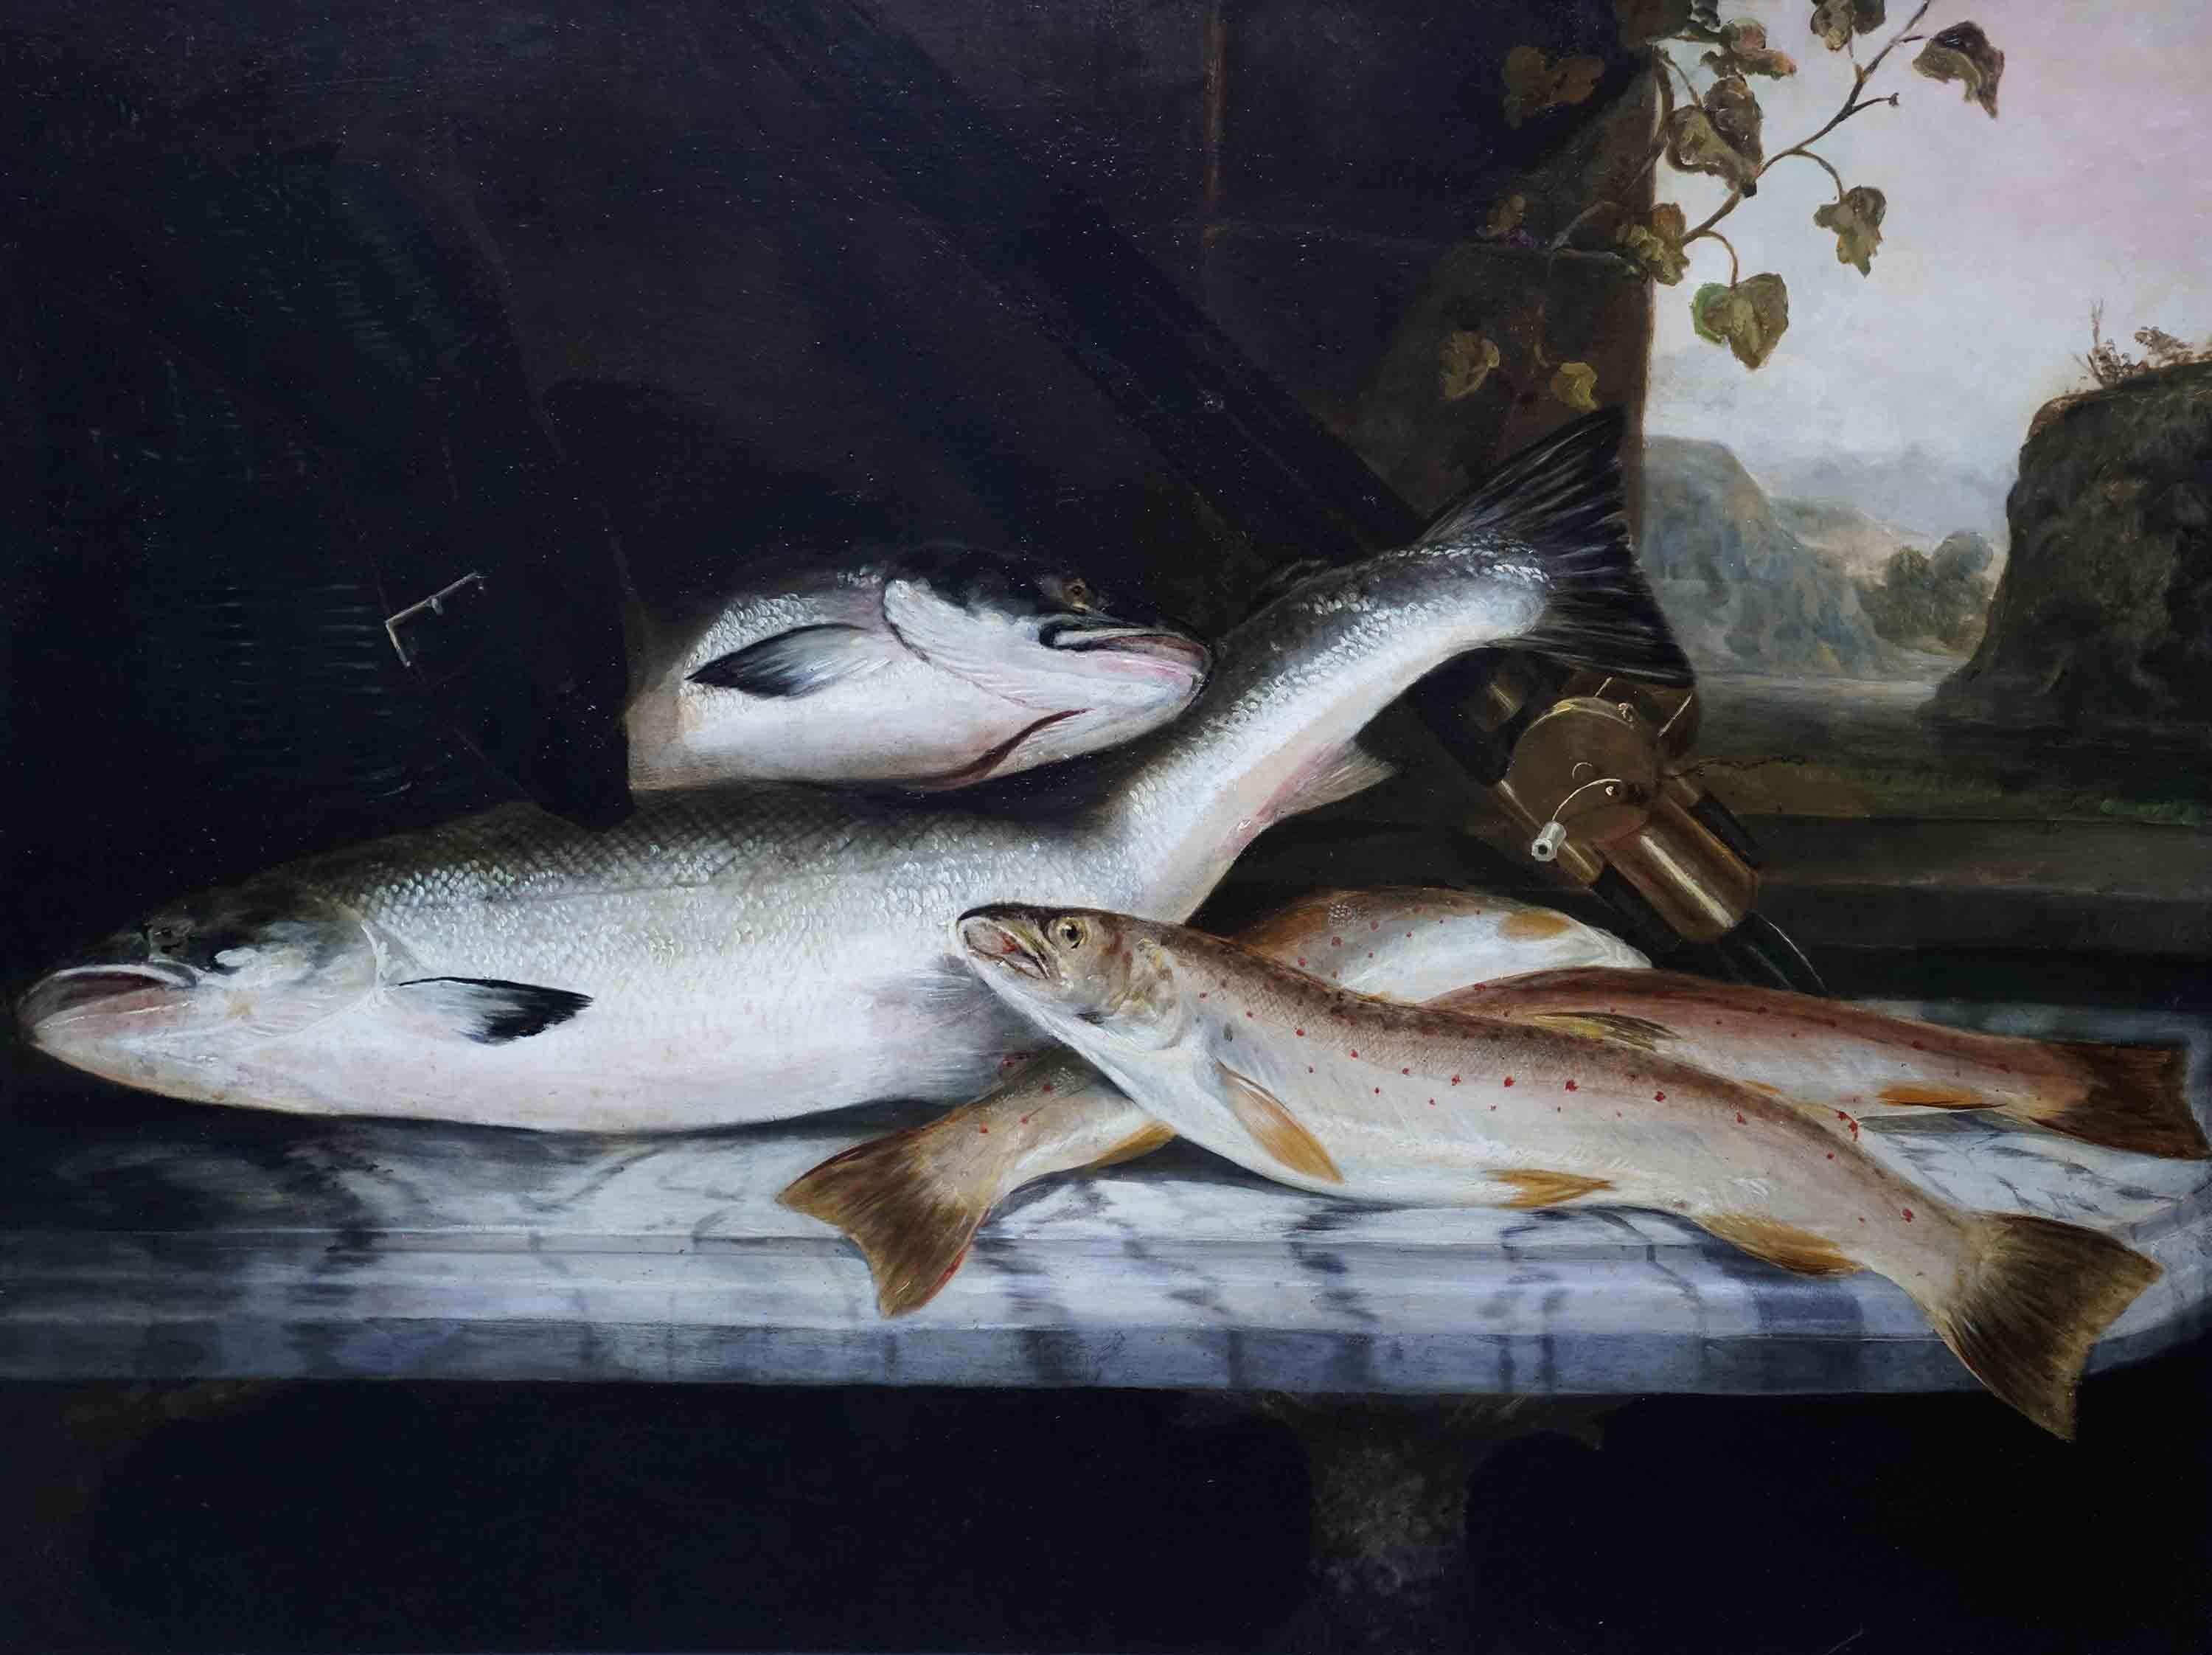 Angling Still Life of Fish - British Edwardian art 1910 oil painting fishing  - Painting by Rowland Knight